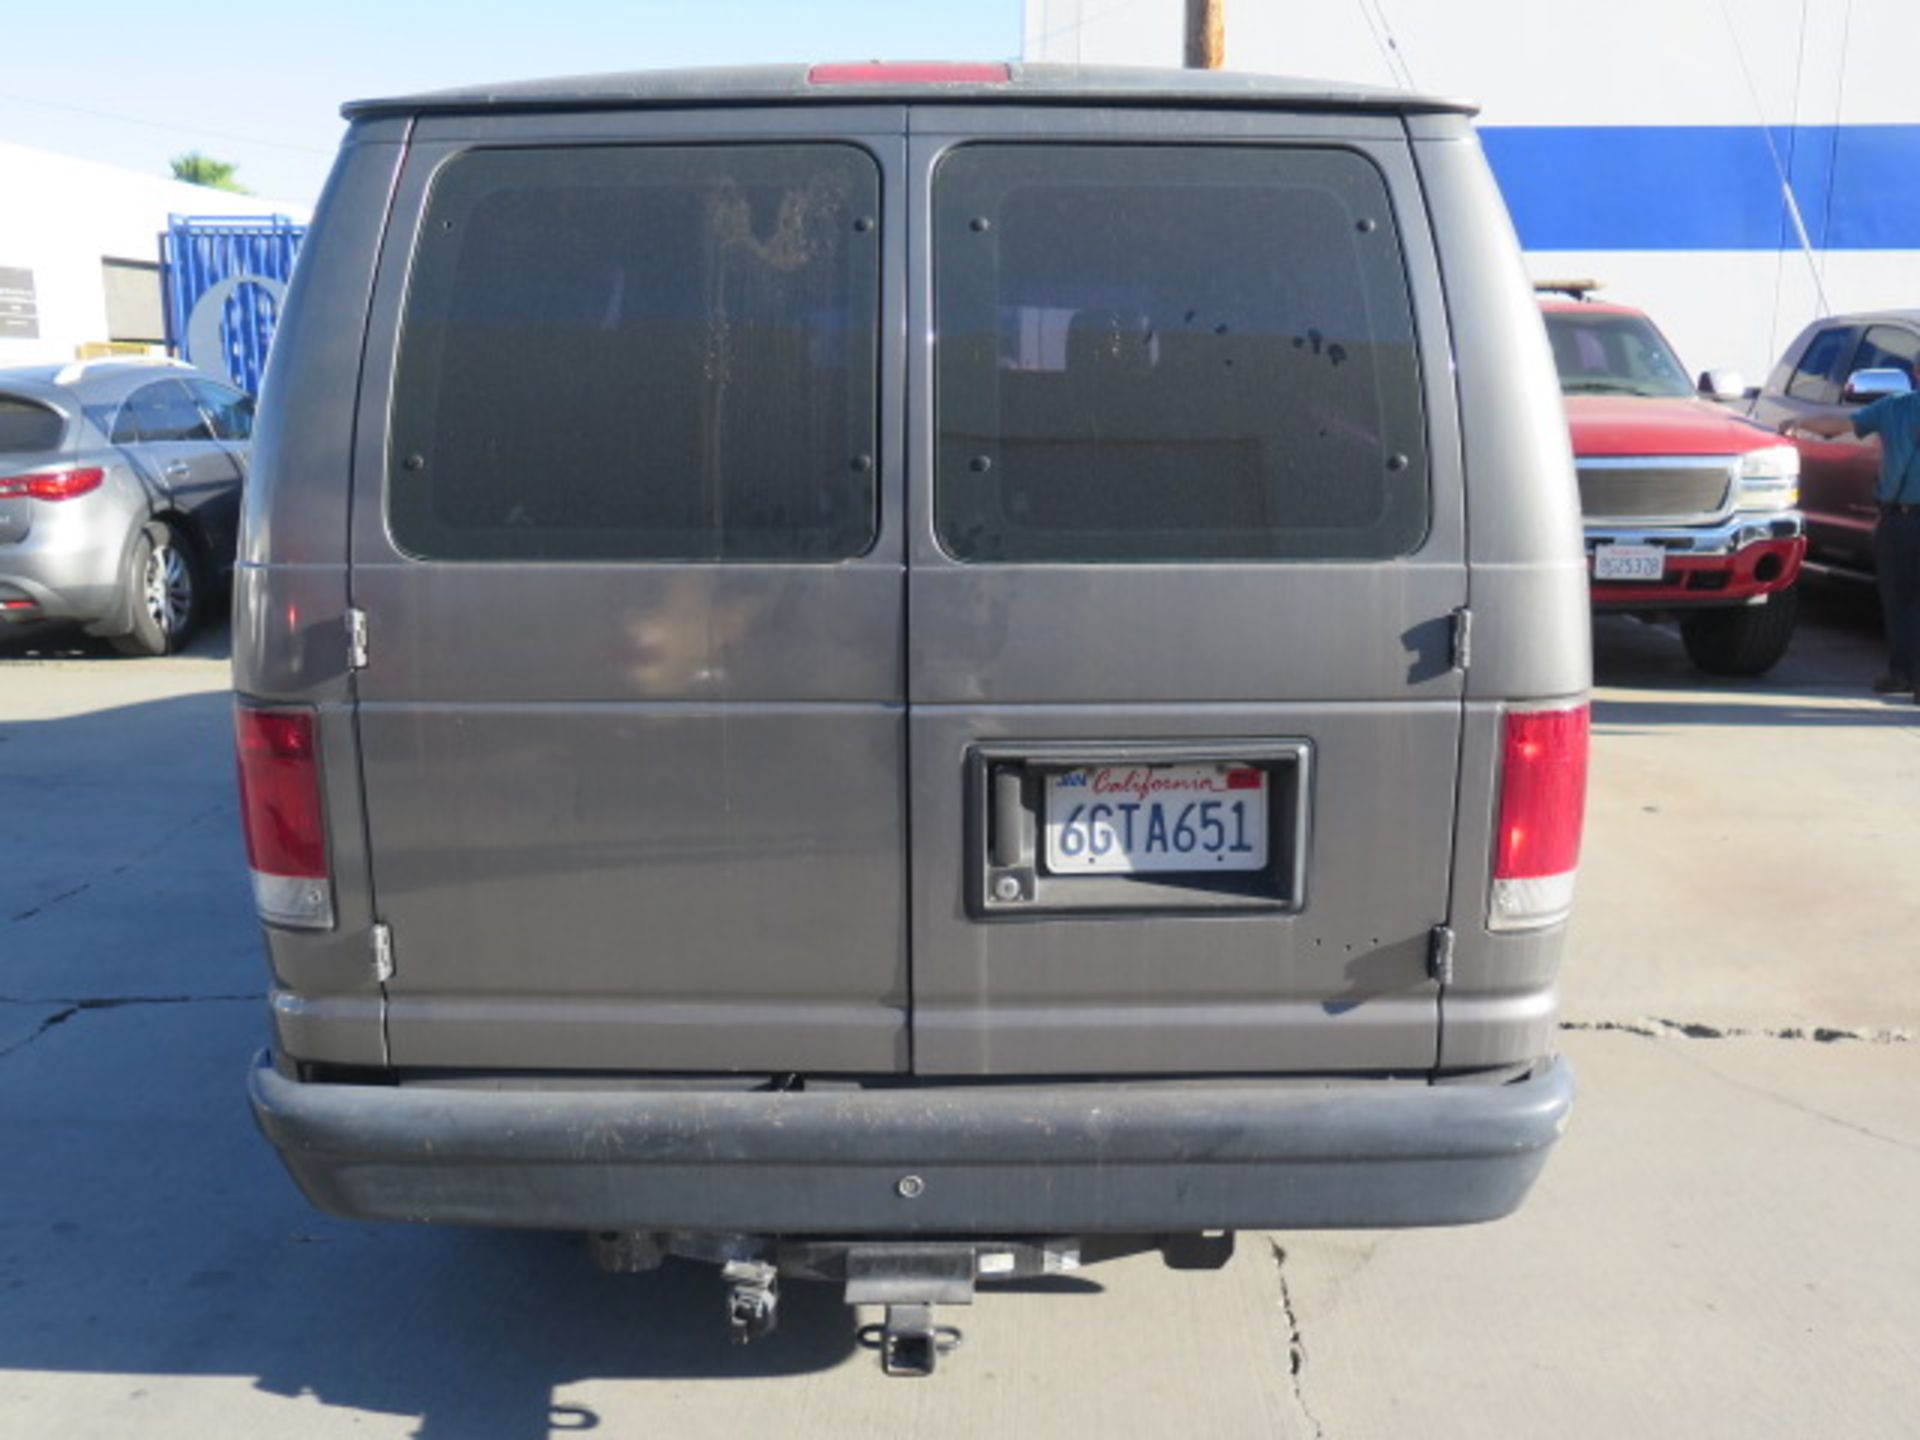 2009 Ford E-Series 11-Passanger Van Lisc# 6GTA651 w/ Gas Engine, Automatic Trans, AC, CD, 110,811 - Image 6 of 15